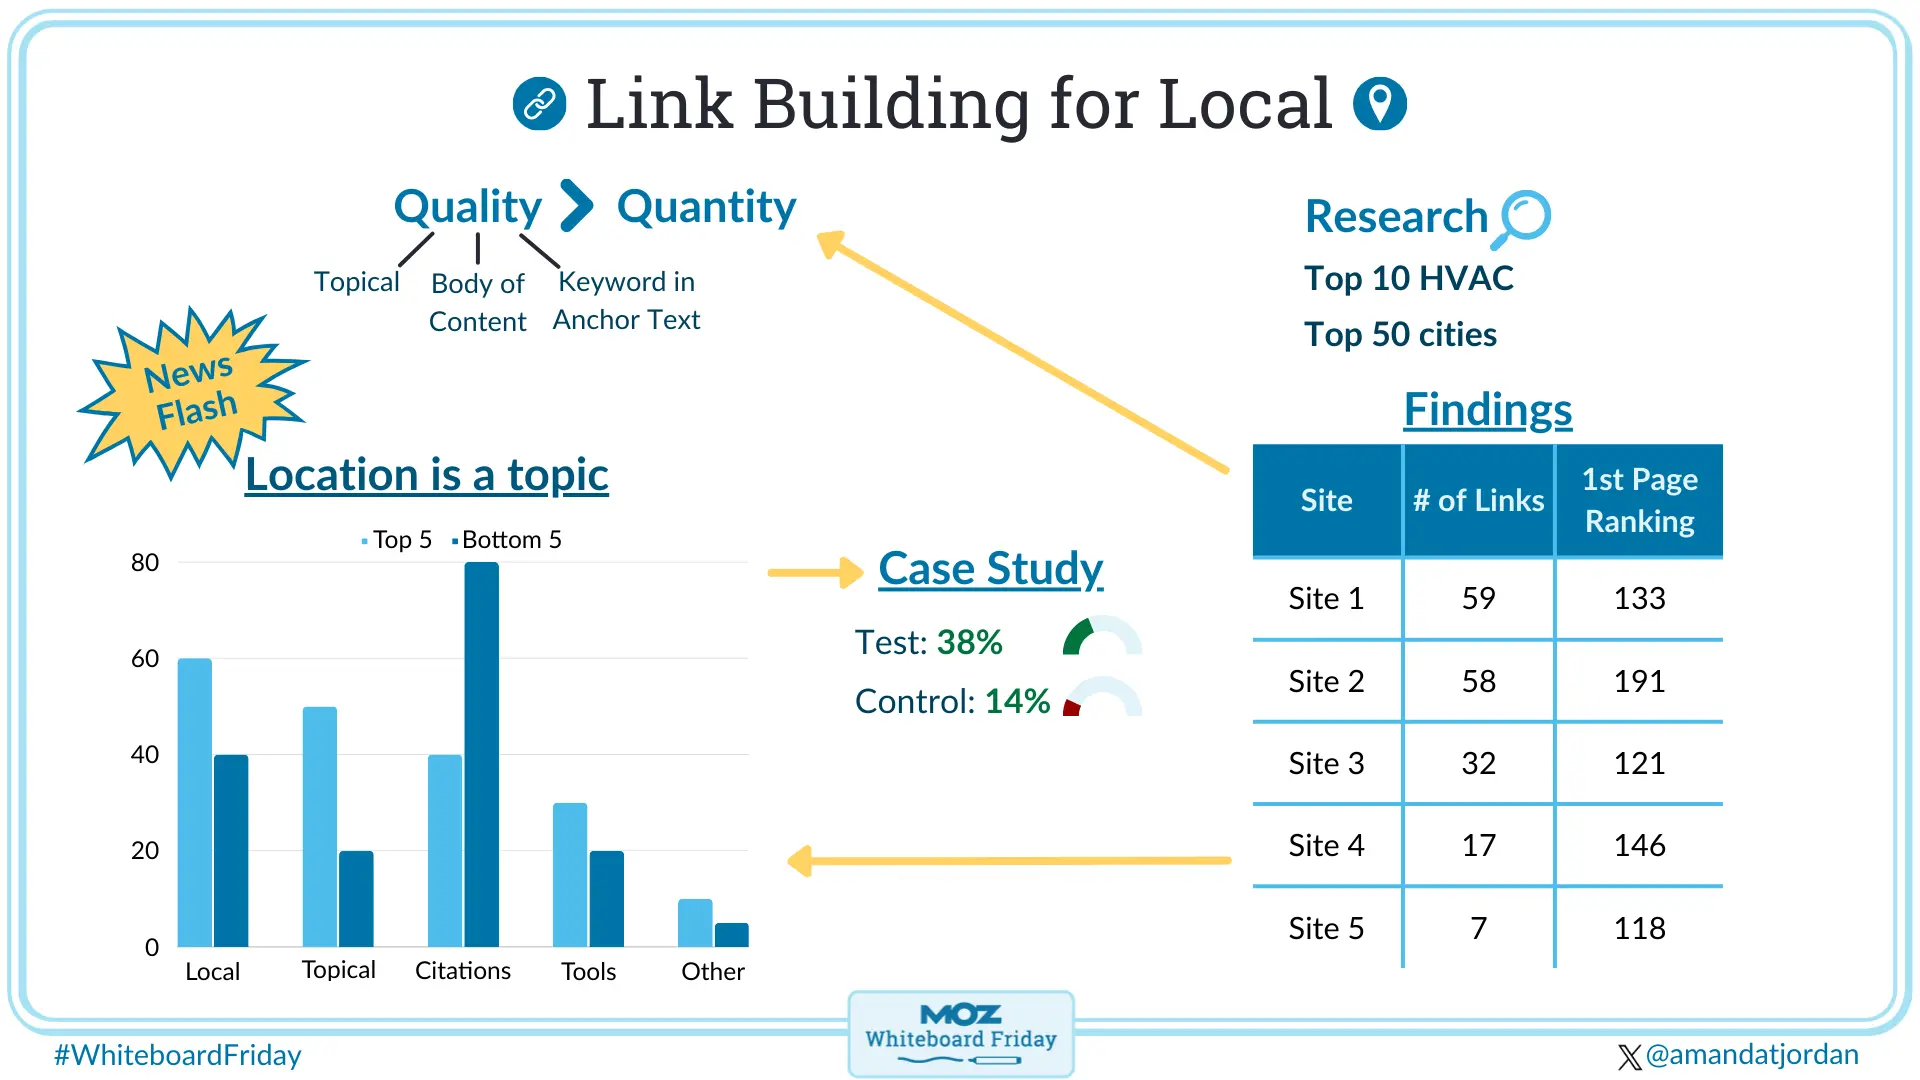 An image from Moz on "Link Building for Local" which highlights that quality links often matter more than quantity